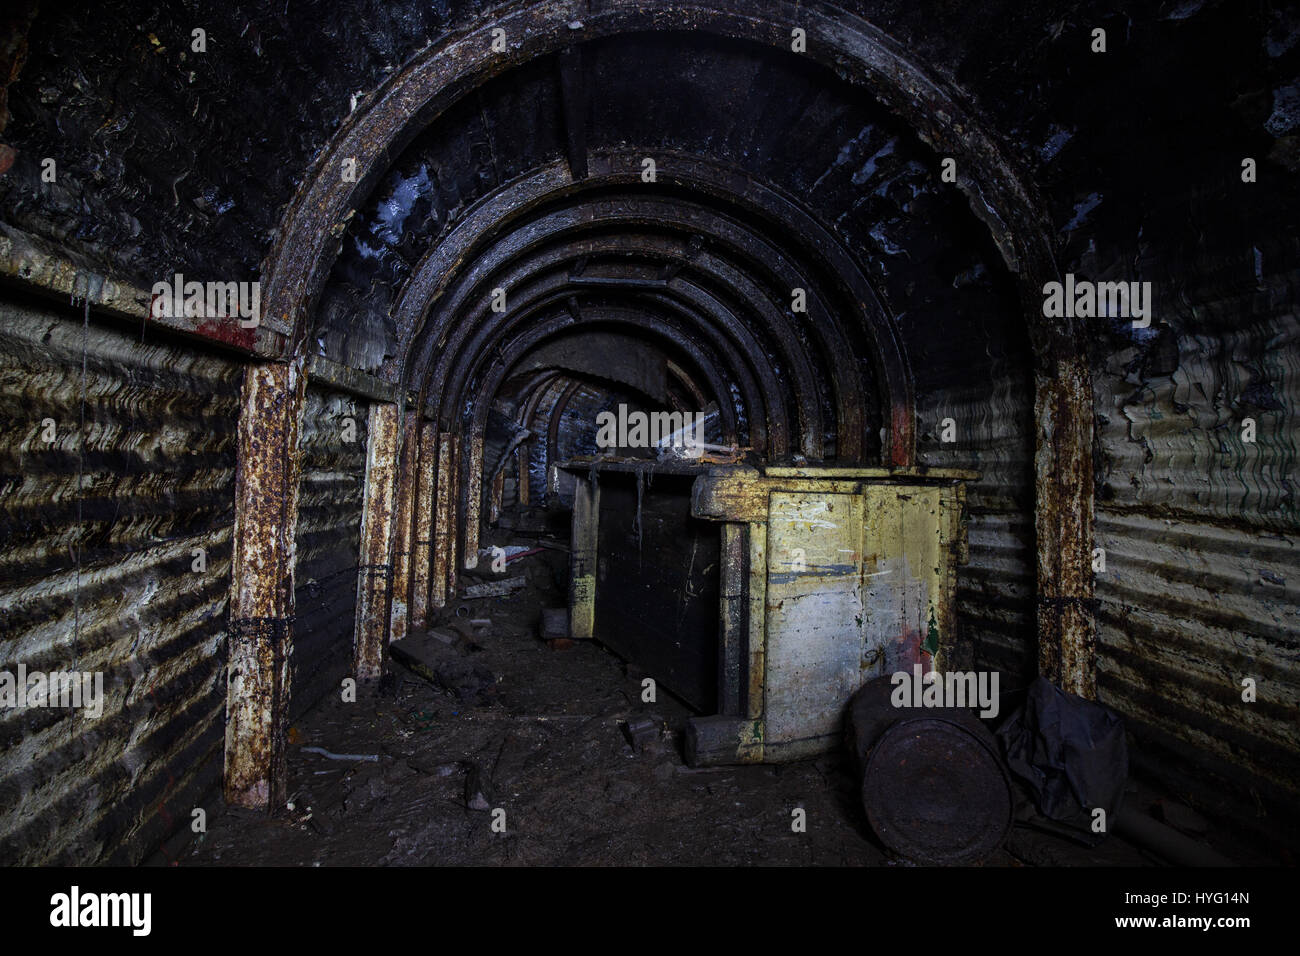 PORT GLASGOW, SCOTLAND: TAKE a look inside the largest purpose built civilian WW2 shelter in the UK where up to one thousand people could have sought refuge from Nazi attacks. Eerie pictures show the dark, rusted tunnels of the underground shelter which was built into the side of a cliff in Port Glasgow, Scotland. Other images show what remains of the toilets and the generator that would have been used to power the shelter. The shots were taken by urban exploration group Abandoned Scotland who hope to draw attention to some of Scotland’s forgotten landmarks. Stock Photo